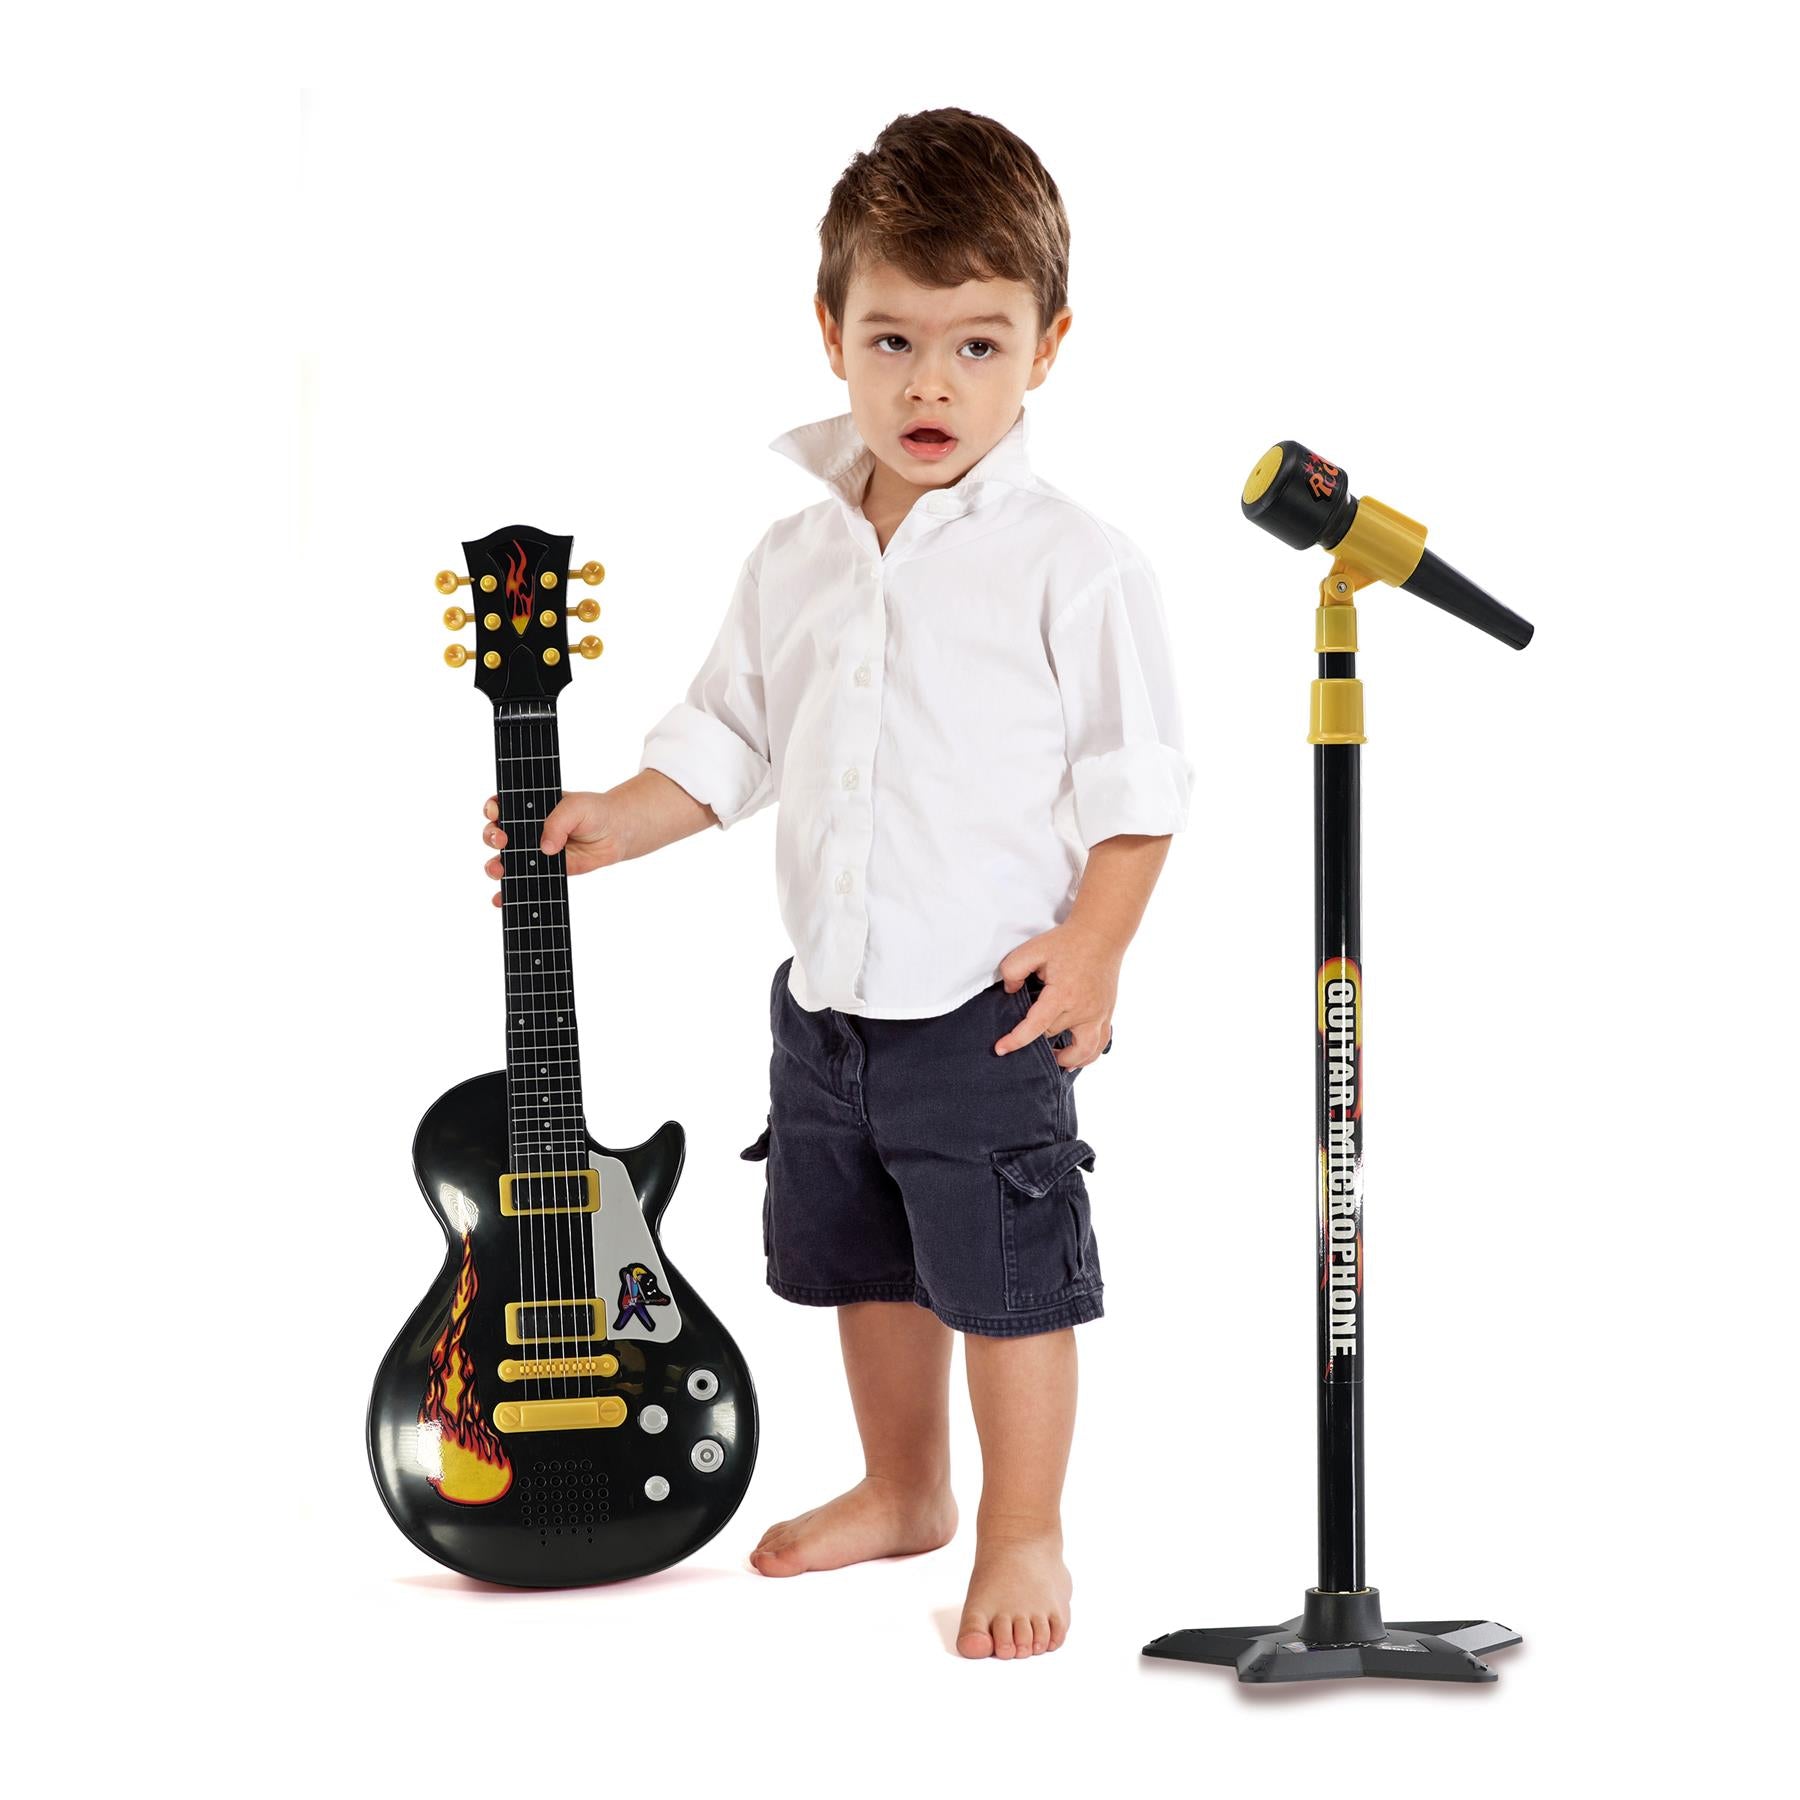 The Magic Toy Shop Toys and Games Kids Electric Play Guitar & Microphone Set